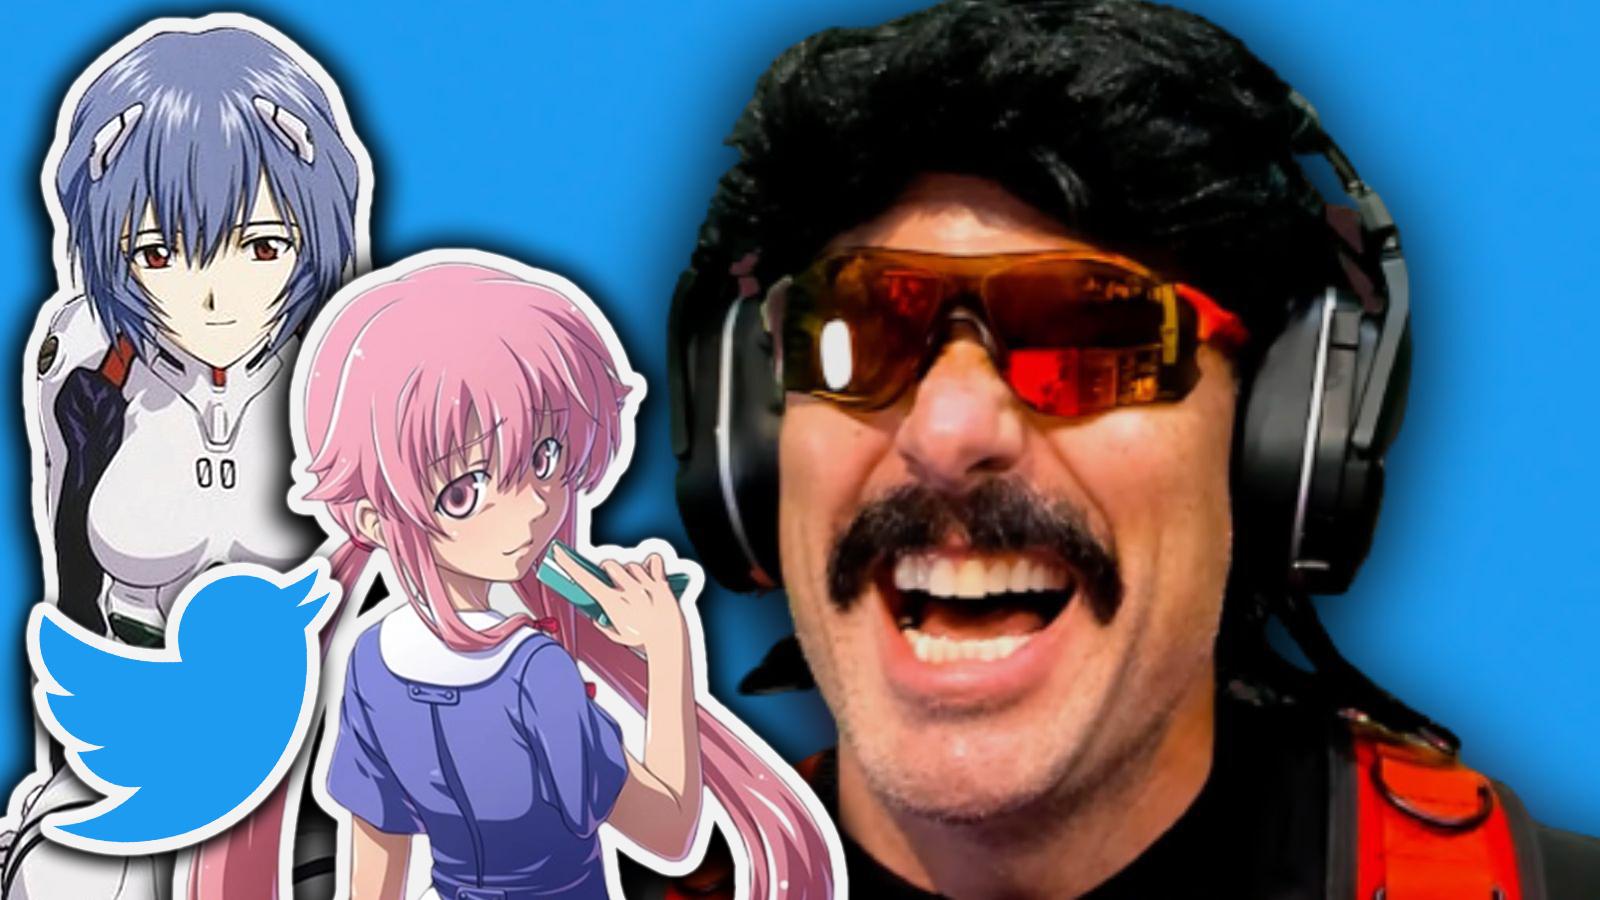 Dr Disrespect roasts “depressed” Twitter users with anime profile